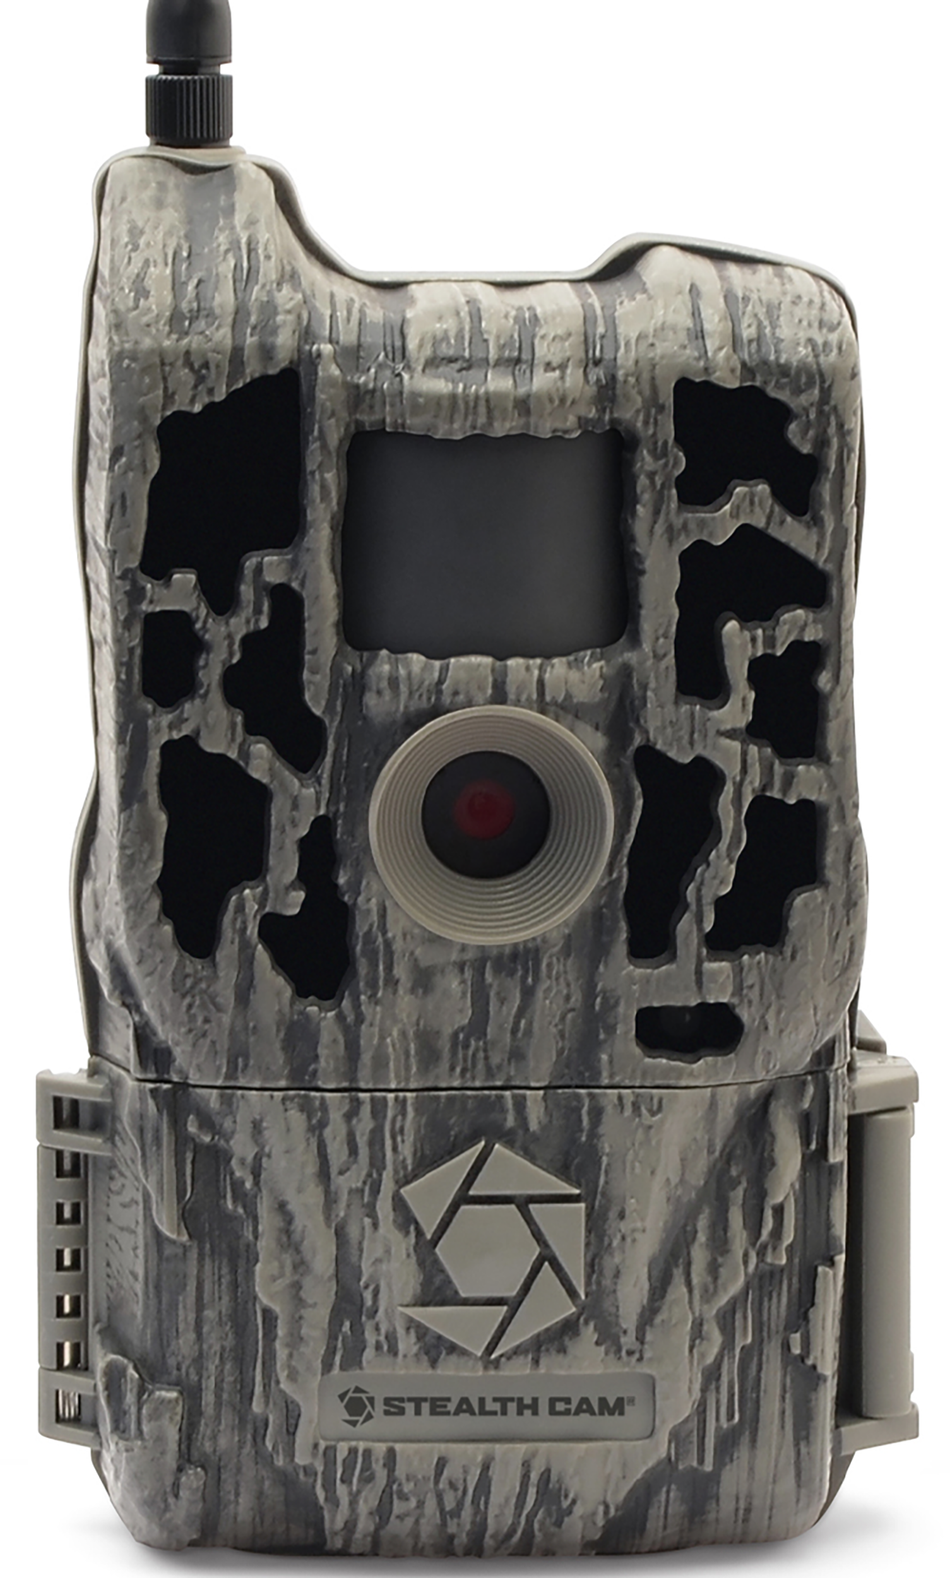 Stealth Cam Reactor, Steal Stc-rvrzw        26mp Reactor Cell  Verizon